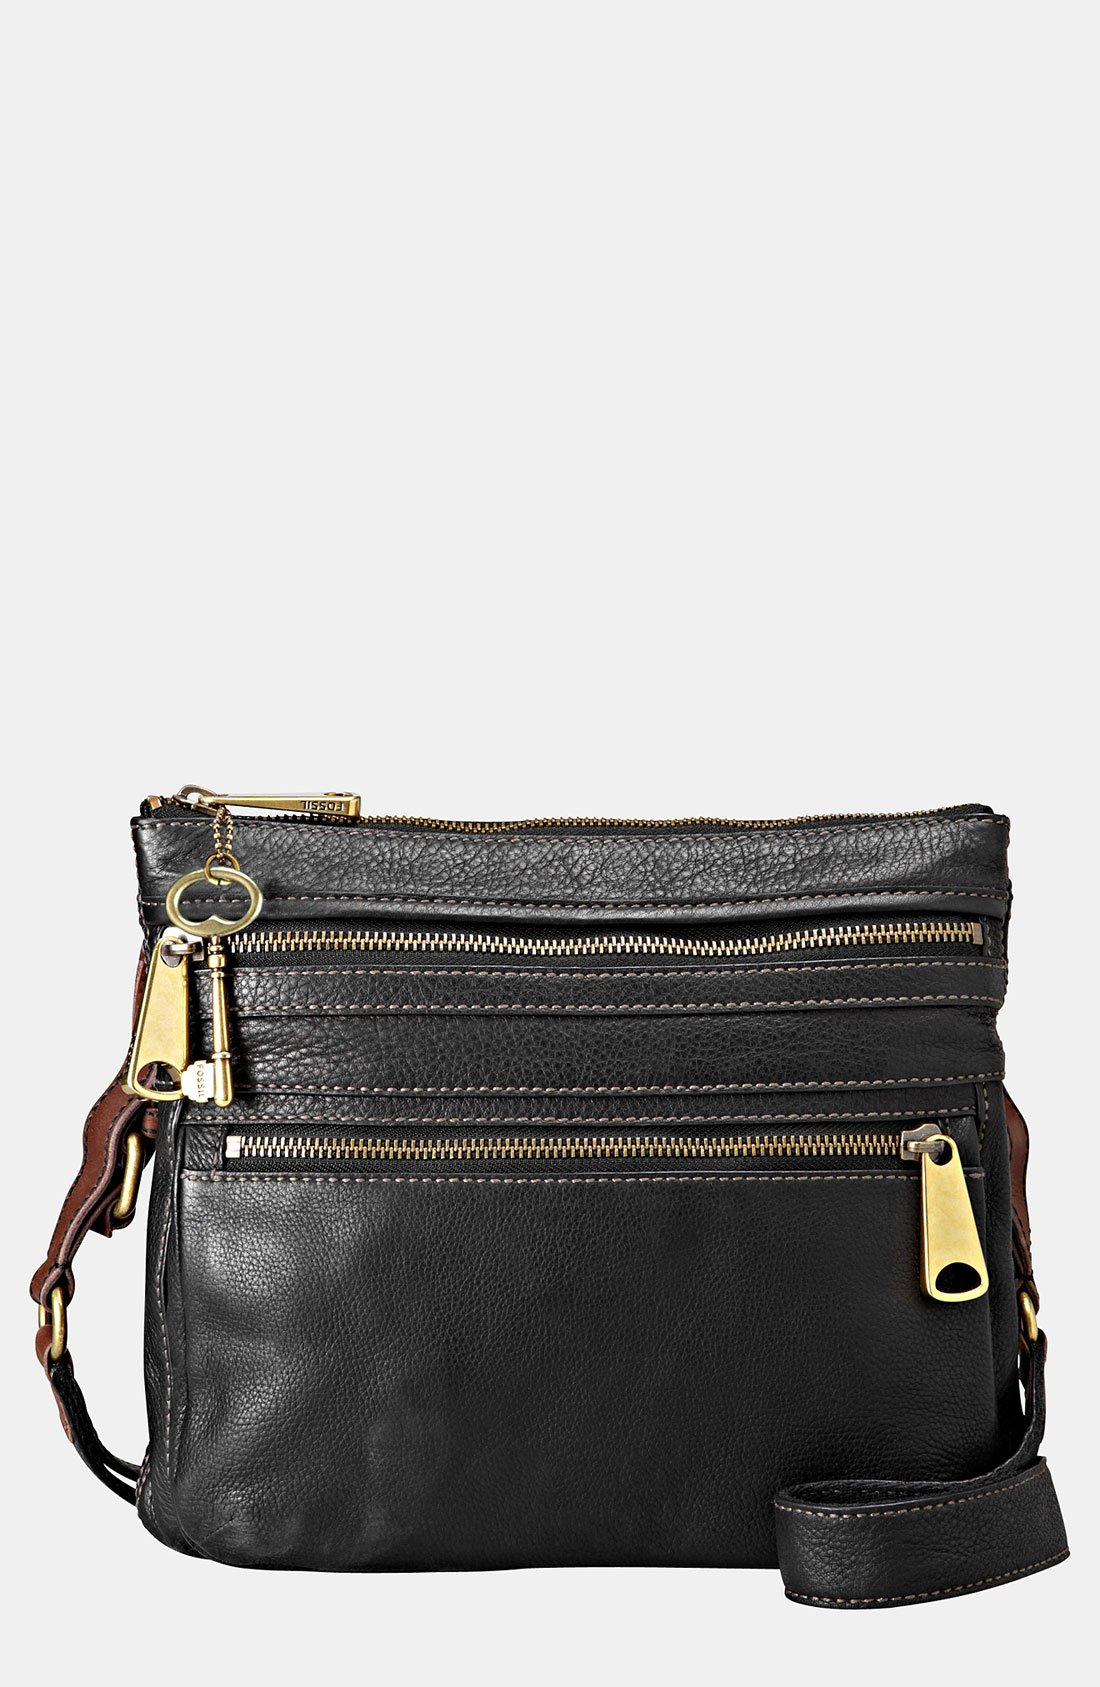 Fossil Crossbody Tote. Fossil Campbell Tote Bag Black.